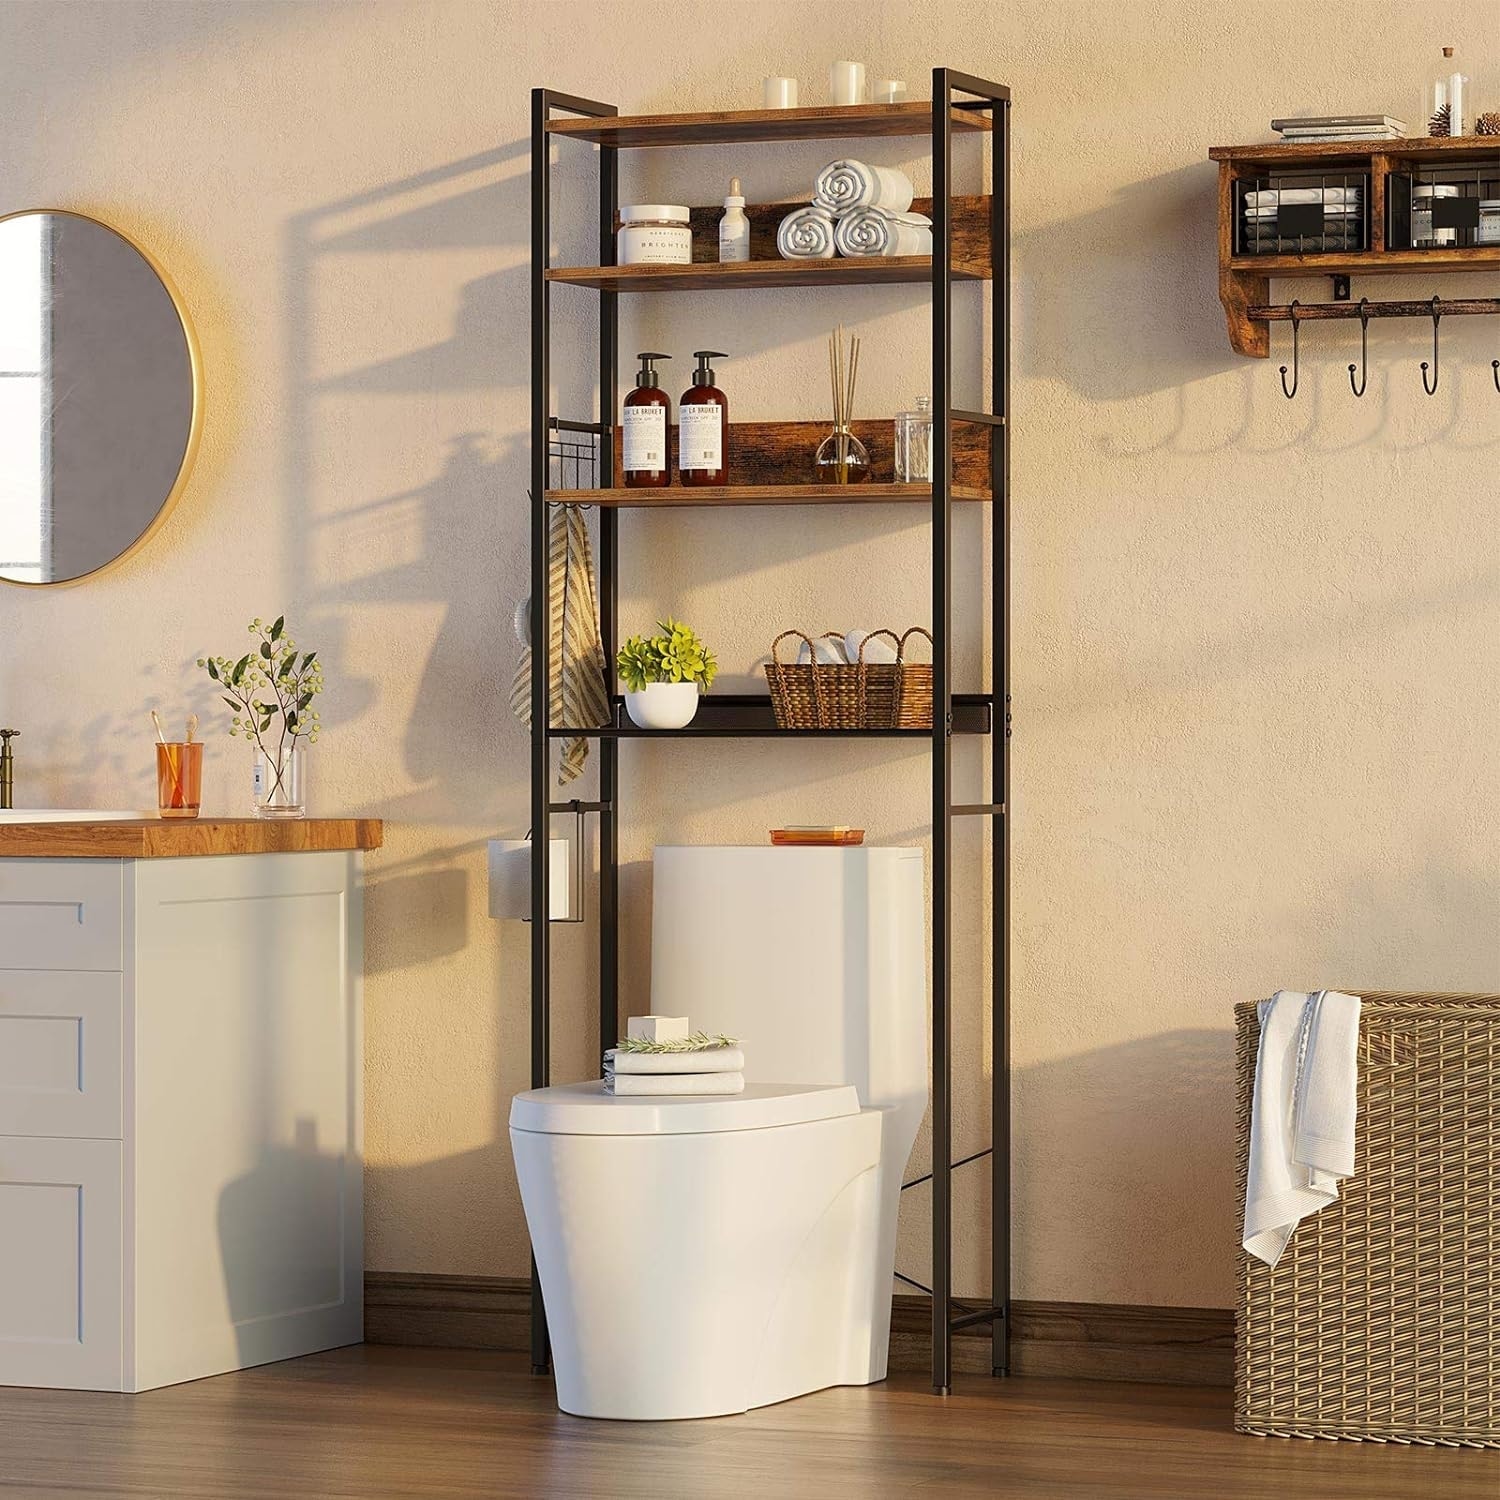 https://ak1.ostkcdn.com/images/products/is/images/direct/b63d03648f415b42409821f560a94bf055fa9470/Freestanding-4-Tier-Wooden-Over-The-Toilet-Storage-Shelf-with-Hooks.jpg